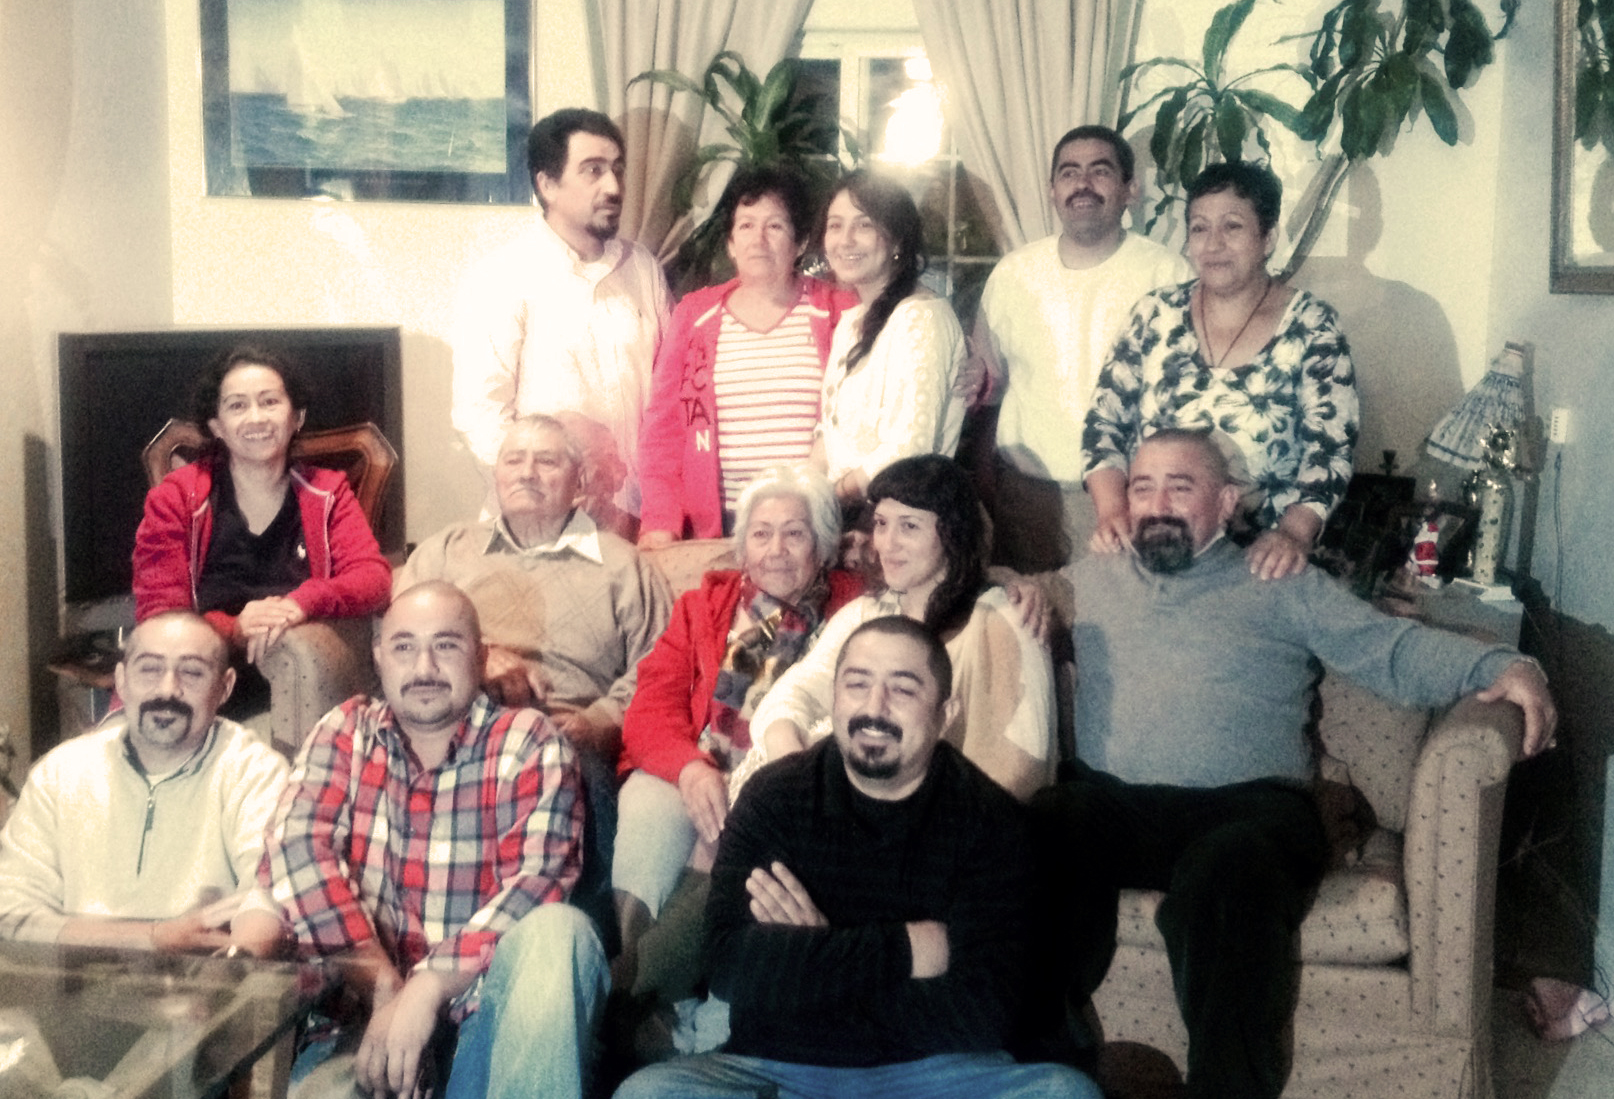 Paz (middle row, left) with her parents, 6 brothers, 2 sisters and 2 nieces, Christmas 2014